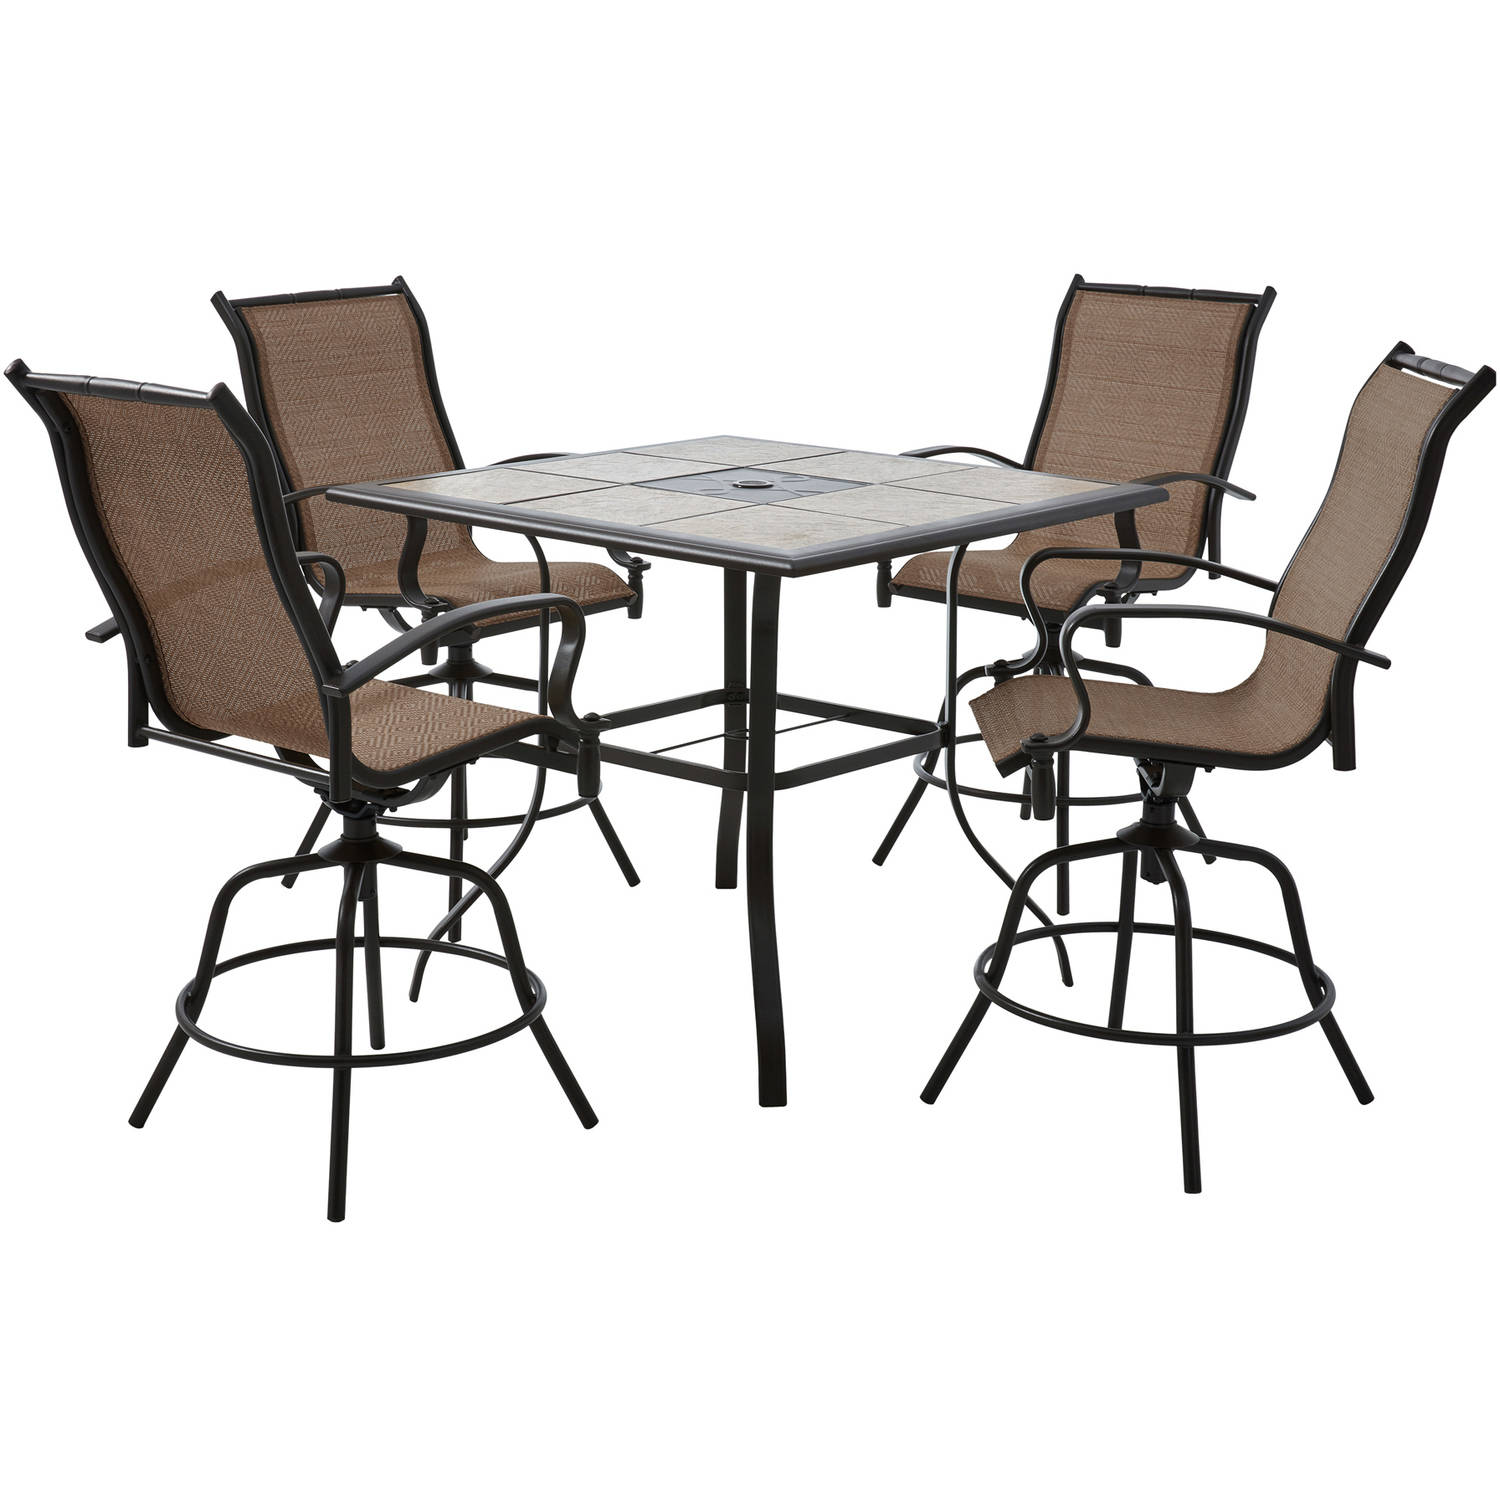 Mainstays Wesley Creek 5-Piece Counter Heights Dining Set, Brown - image 2 of 9